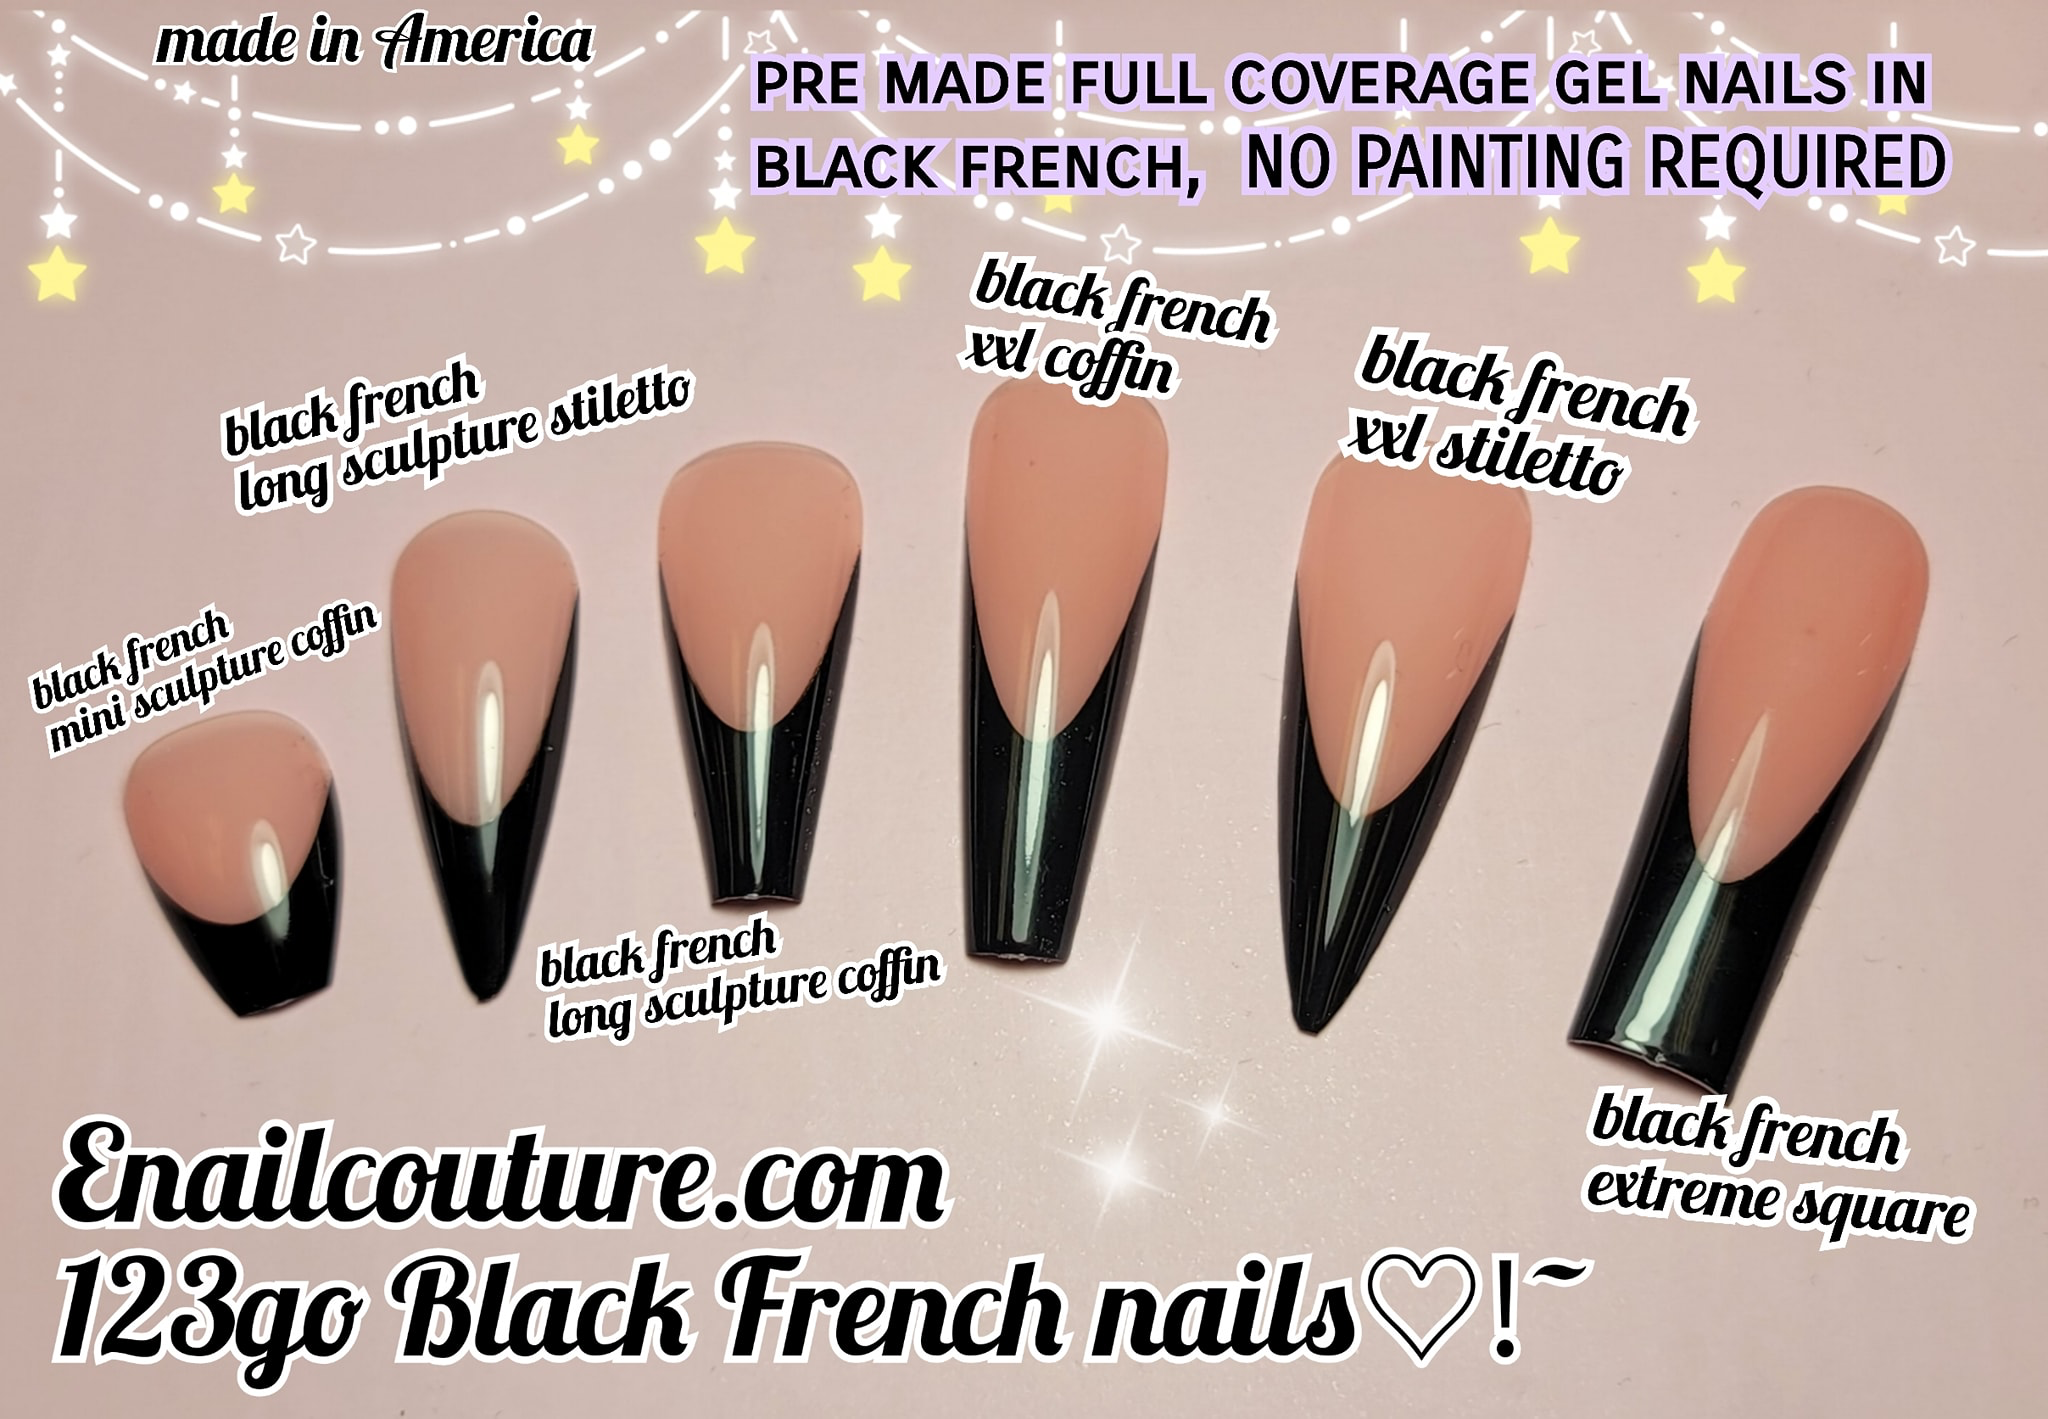 Black French 123 Go! Nails (pre made full coverage gel nail tips